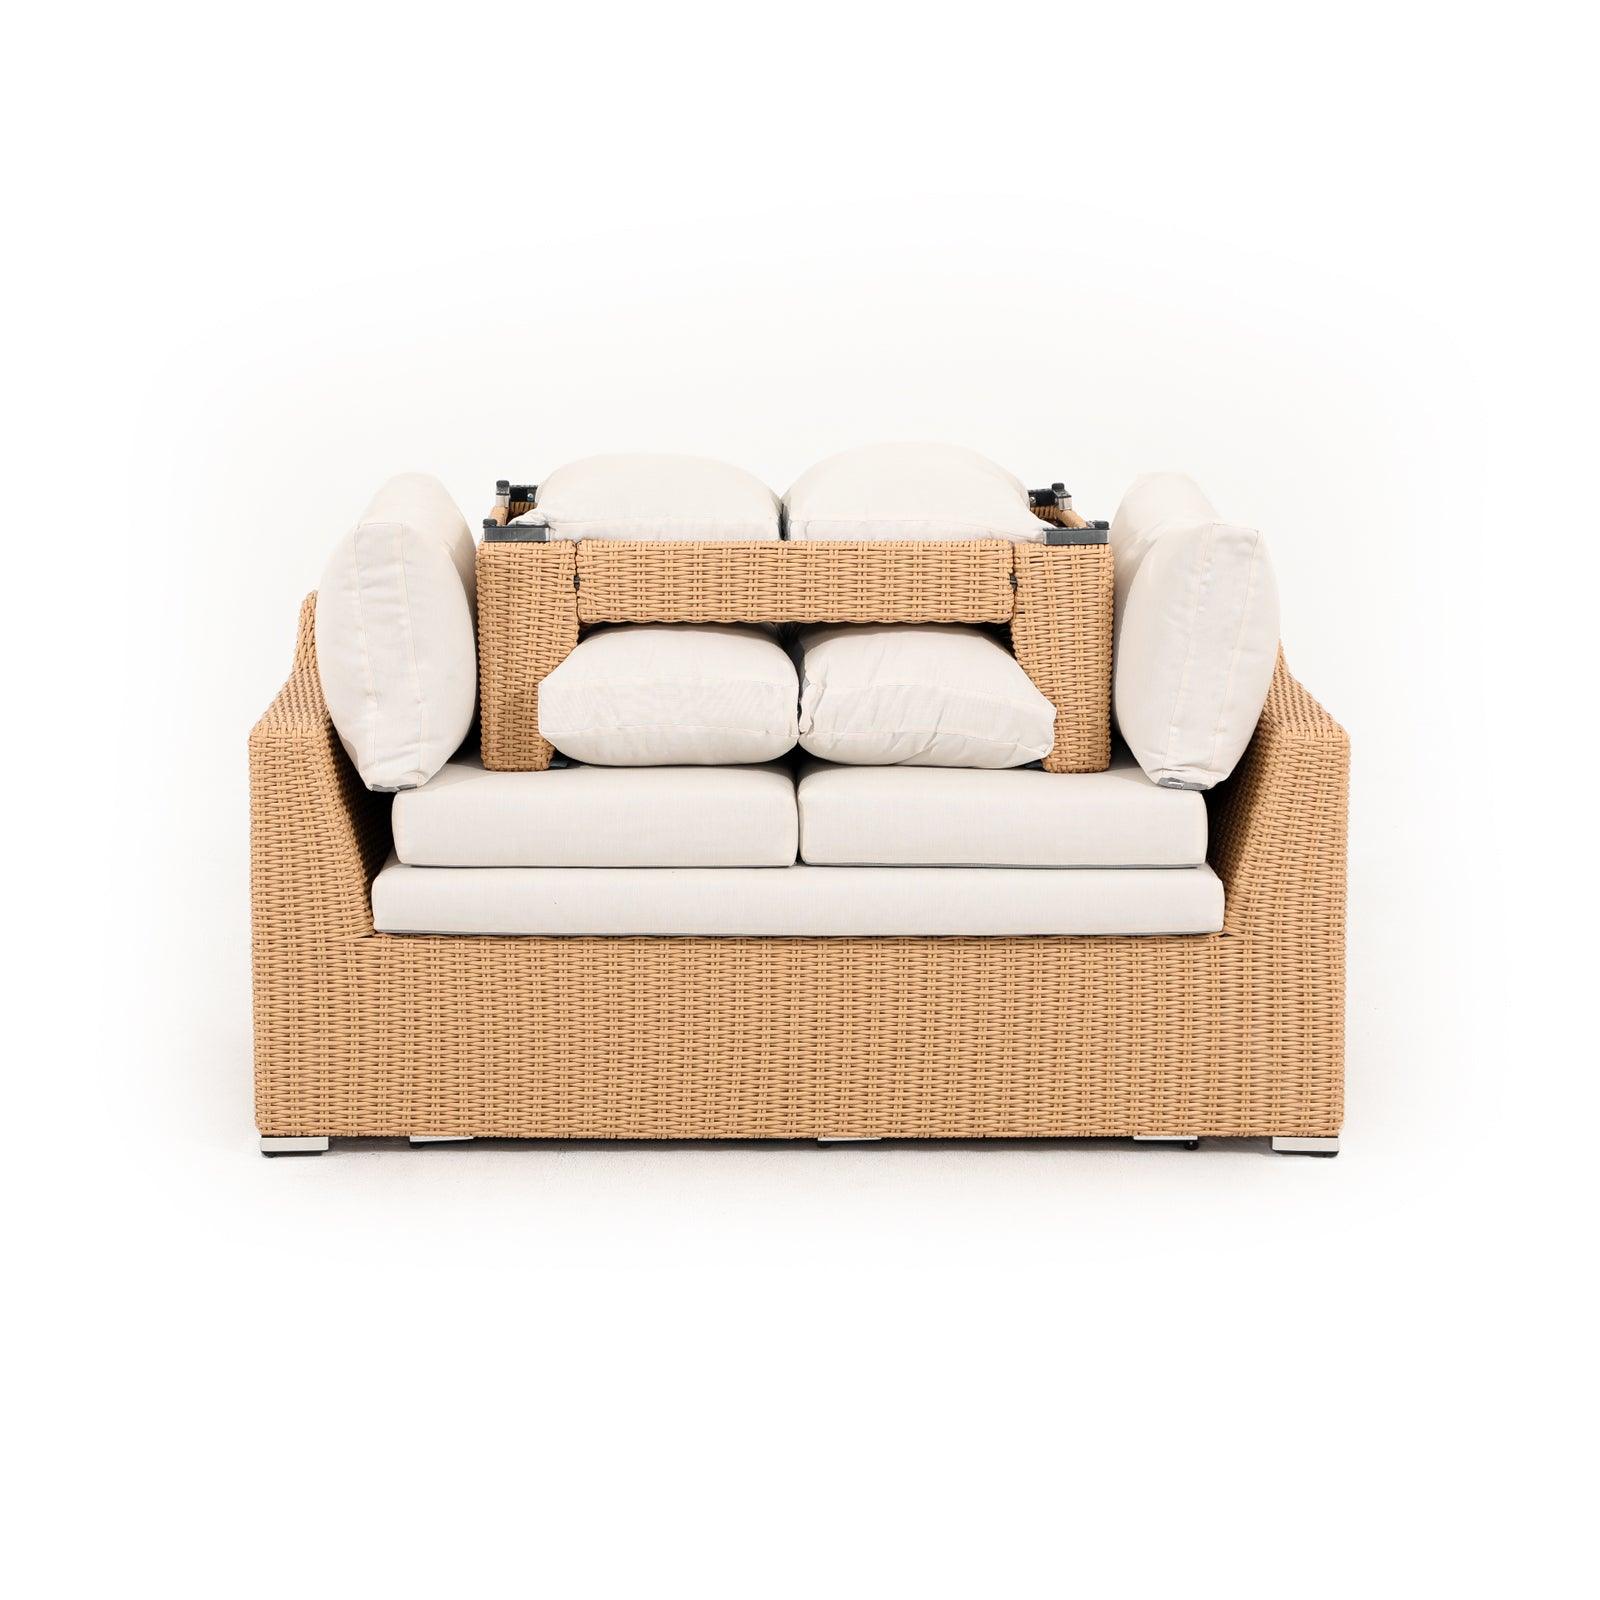 Elba natural color rattan outdoor sectional sofa set with beige cushions, 1 two-seater sofa, 2 Single Sofas, 1 table, stackable design- Jardina Furniture